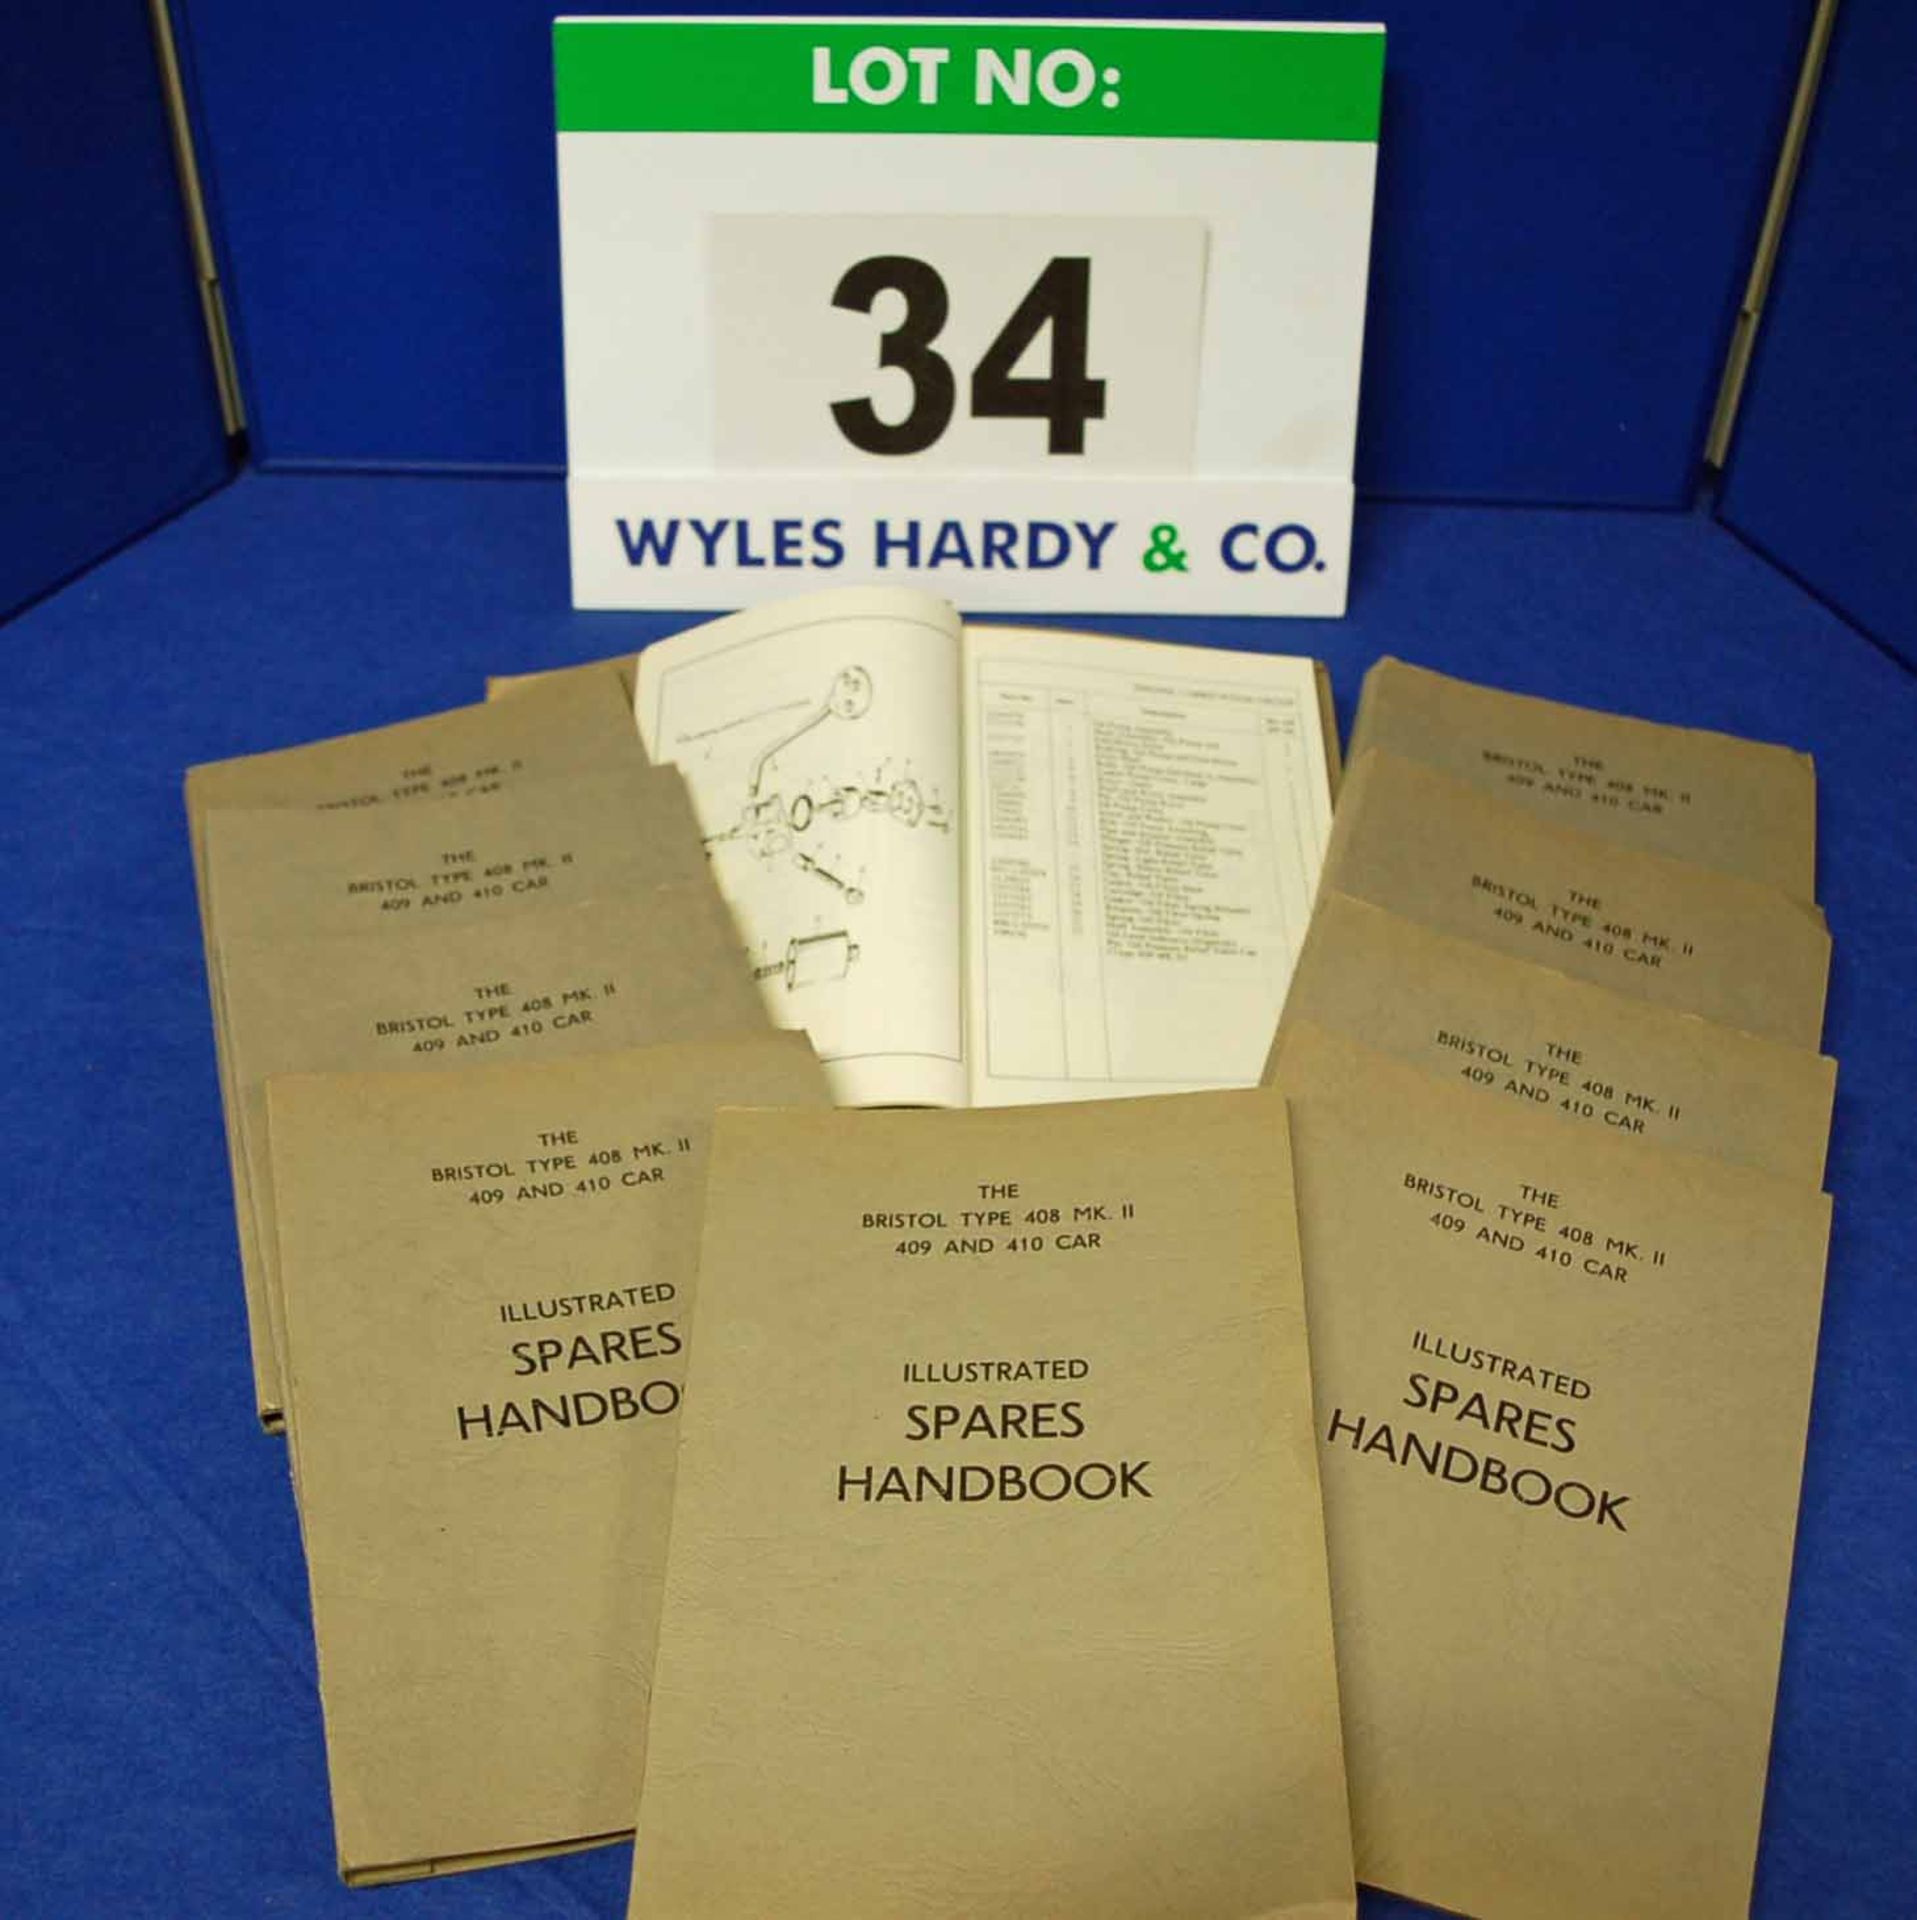 Ten Copies of the Spares Handbook for The Bristol Type 408 Mk II, 409 and 410 Car